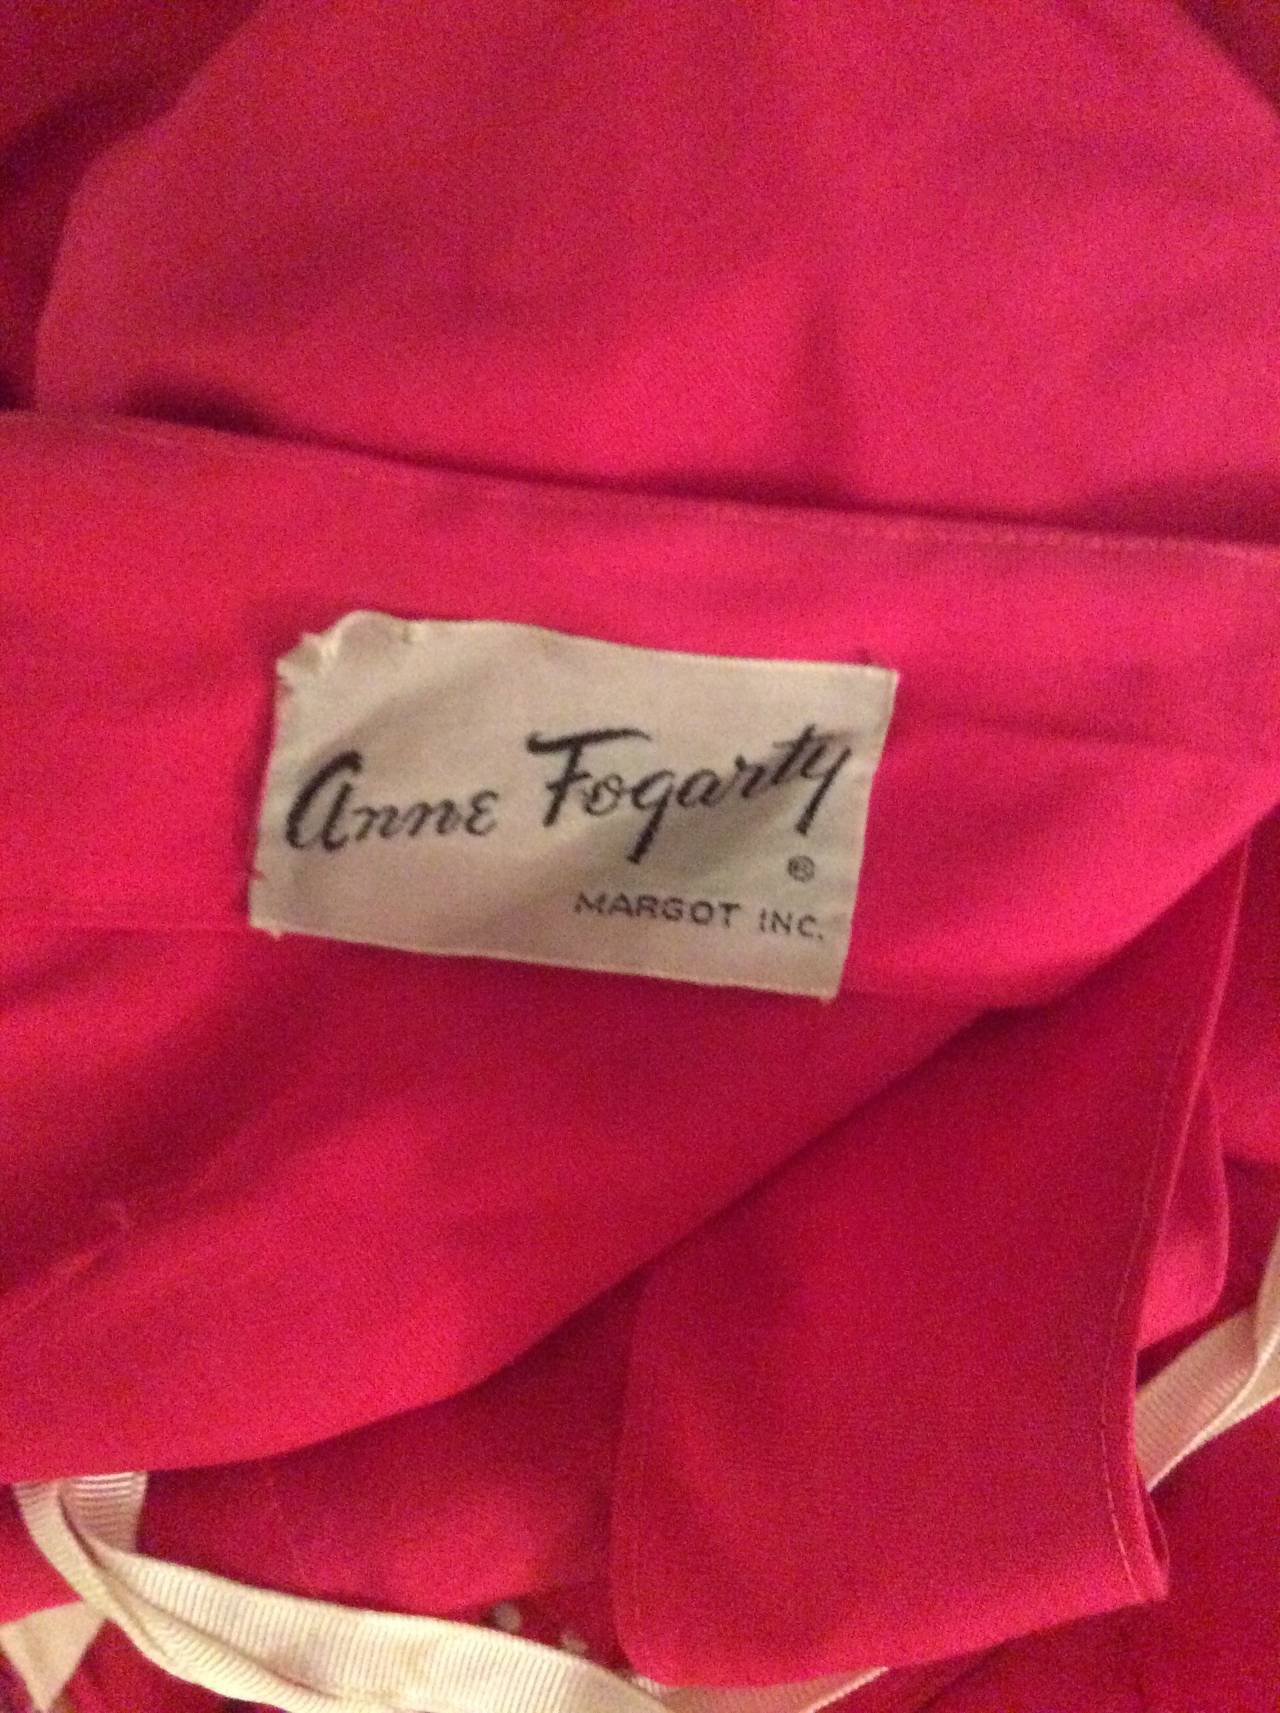 Pretty 1950s Vintage Anne Fogarty Raspberry Pink Full Skirt Button Dress In Excellent Condition For Sale In San Diego, CA